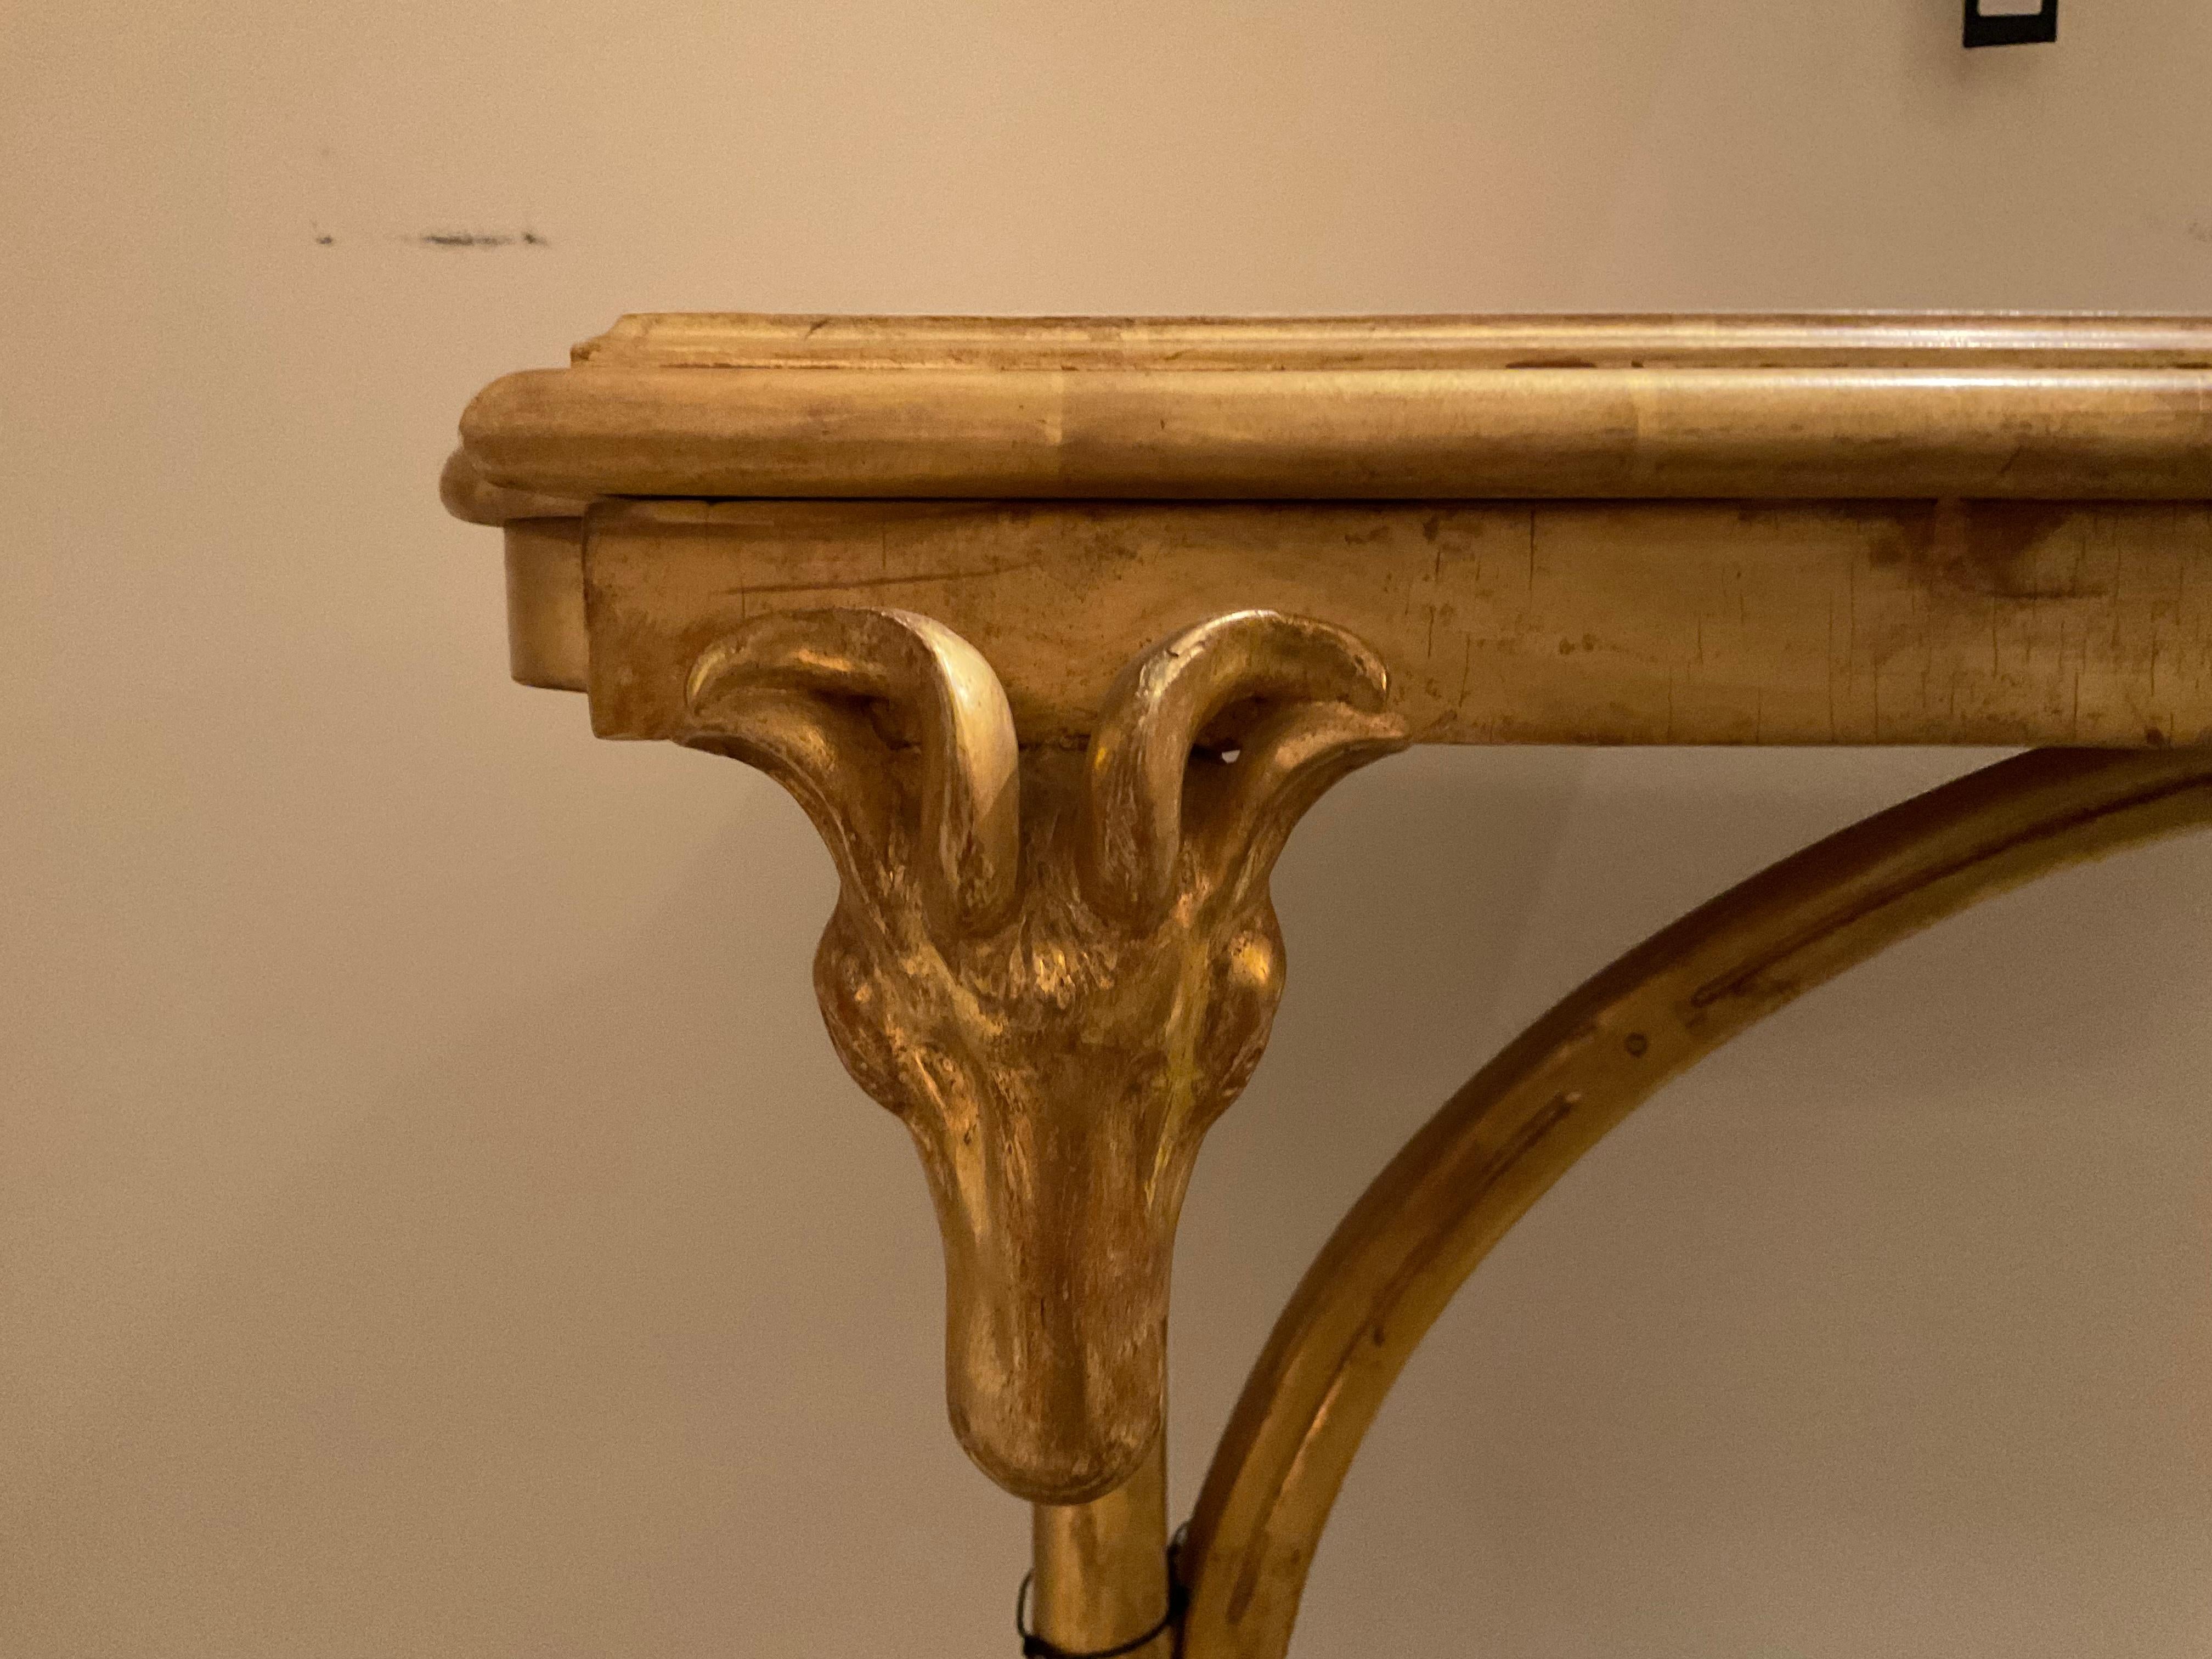 Reproduction Rams head table in the style of Jansen in a gilt finish with hoof feet and crescent stretcher.